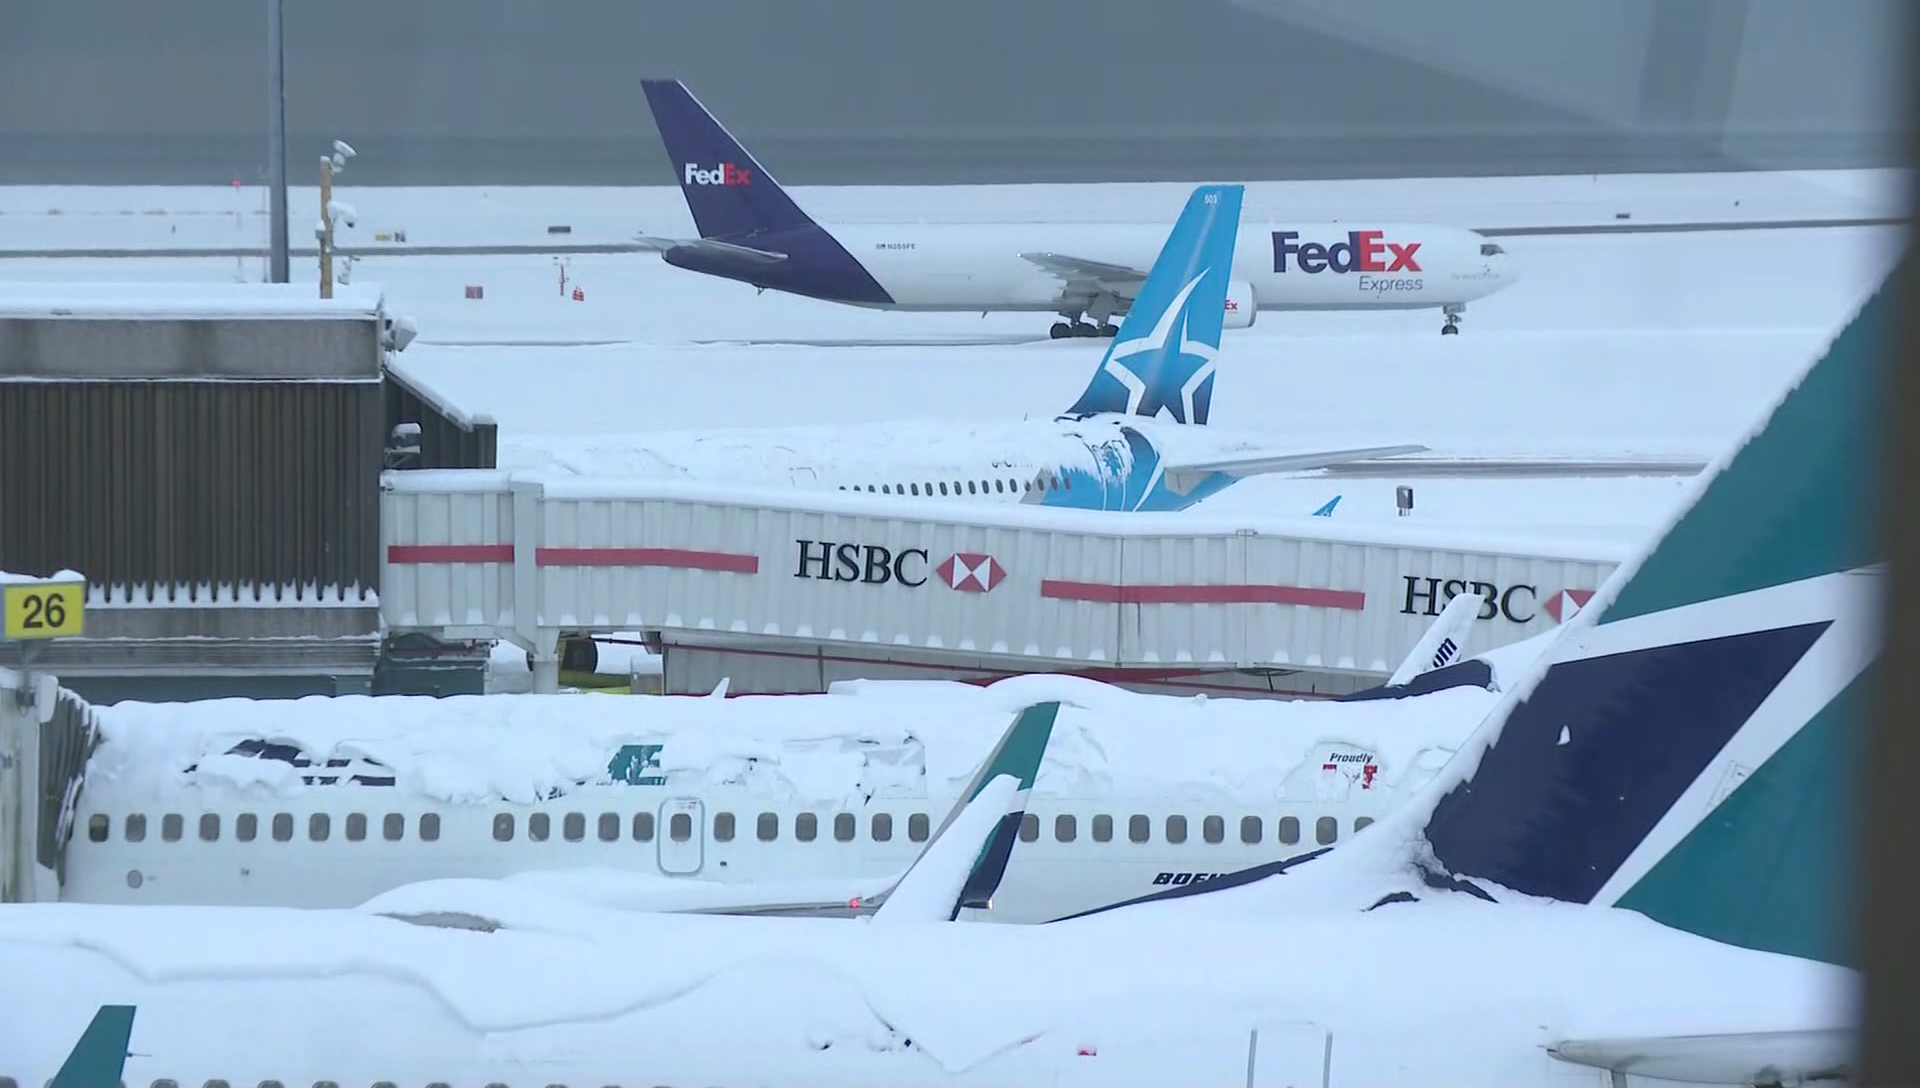 Planes at Vancouver International Airport on Tuesday, Dec. 20, 2022 following a major snow storm that brought operations to a halt